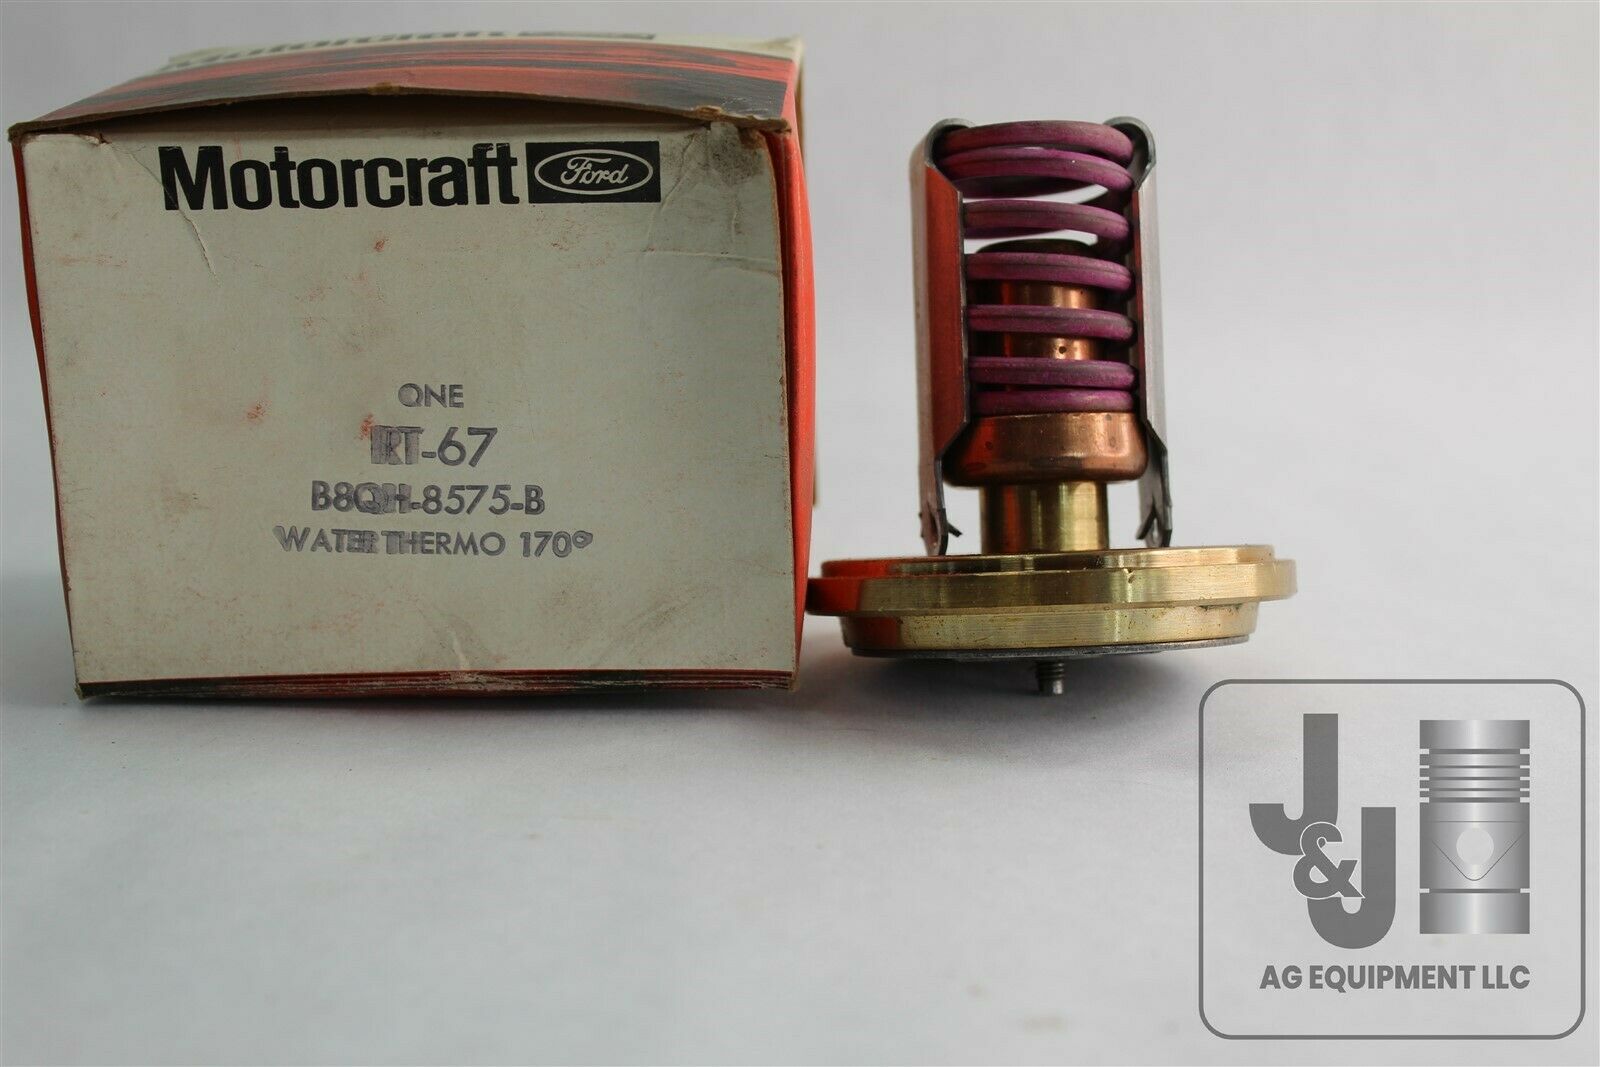 NOS MOTORCRAFT FORD RT67/B8QH8575B WATER THERMO 170 DEGREES